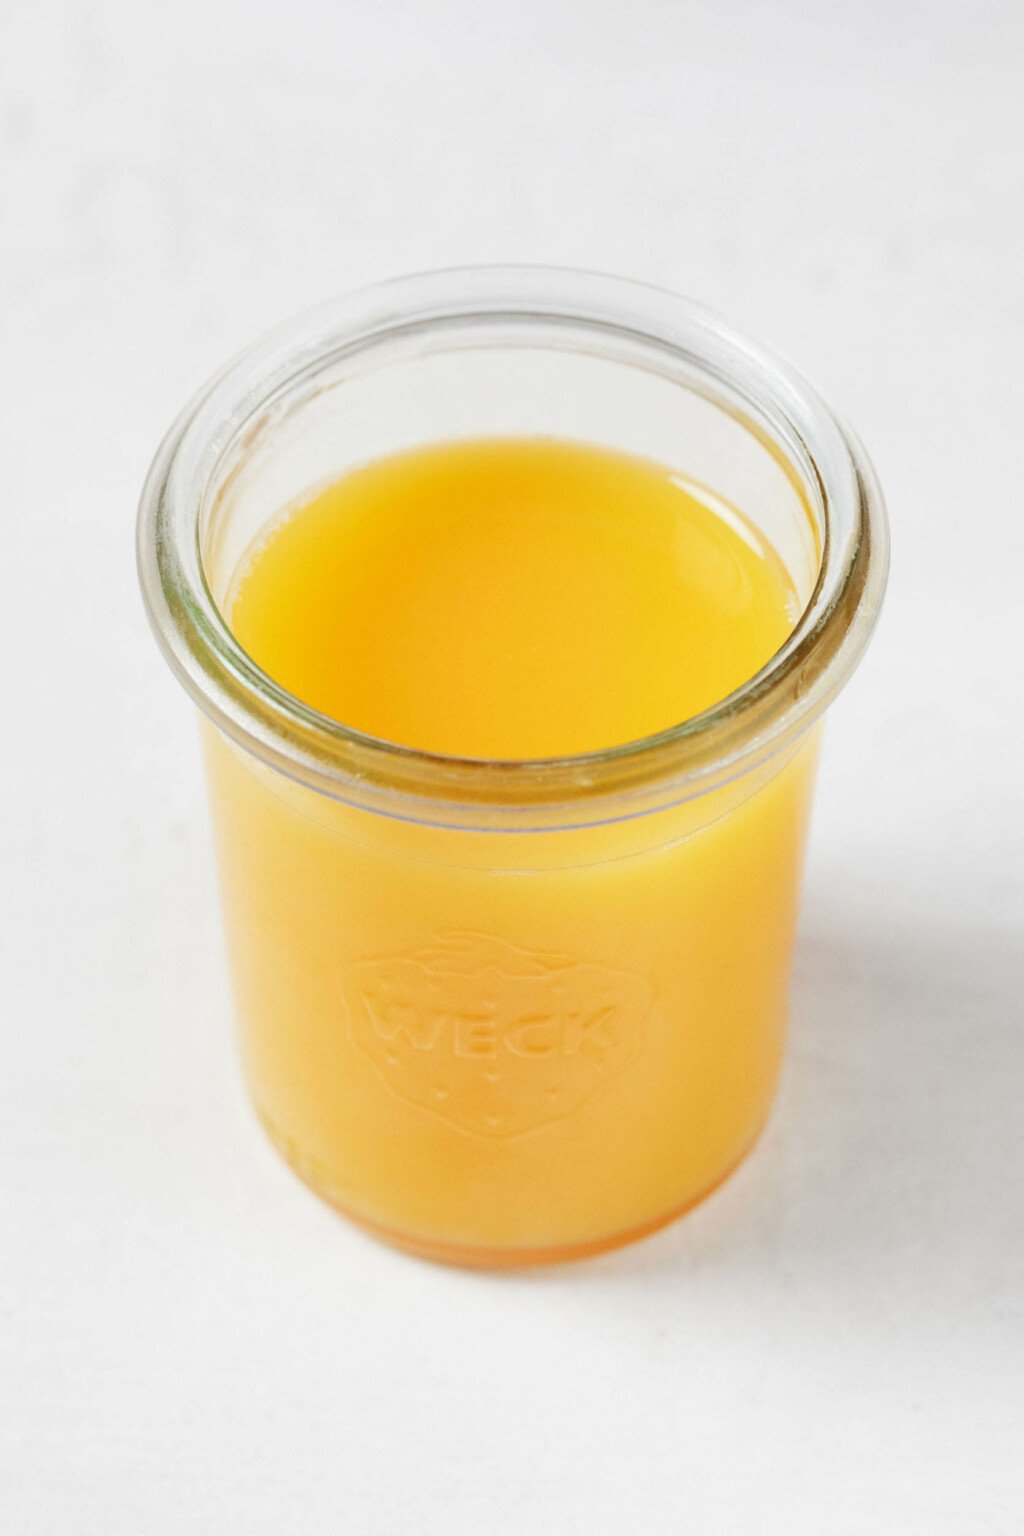 An image of a clear Weck mason jar, which is being used to hold bright golden orange juice.